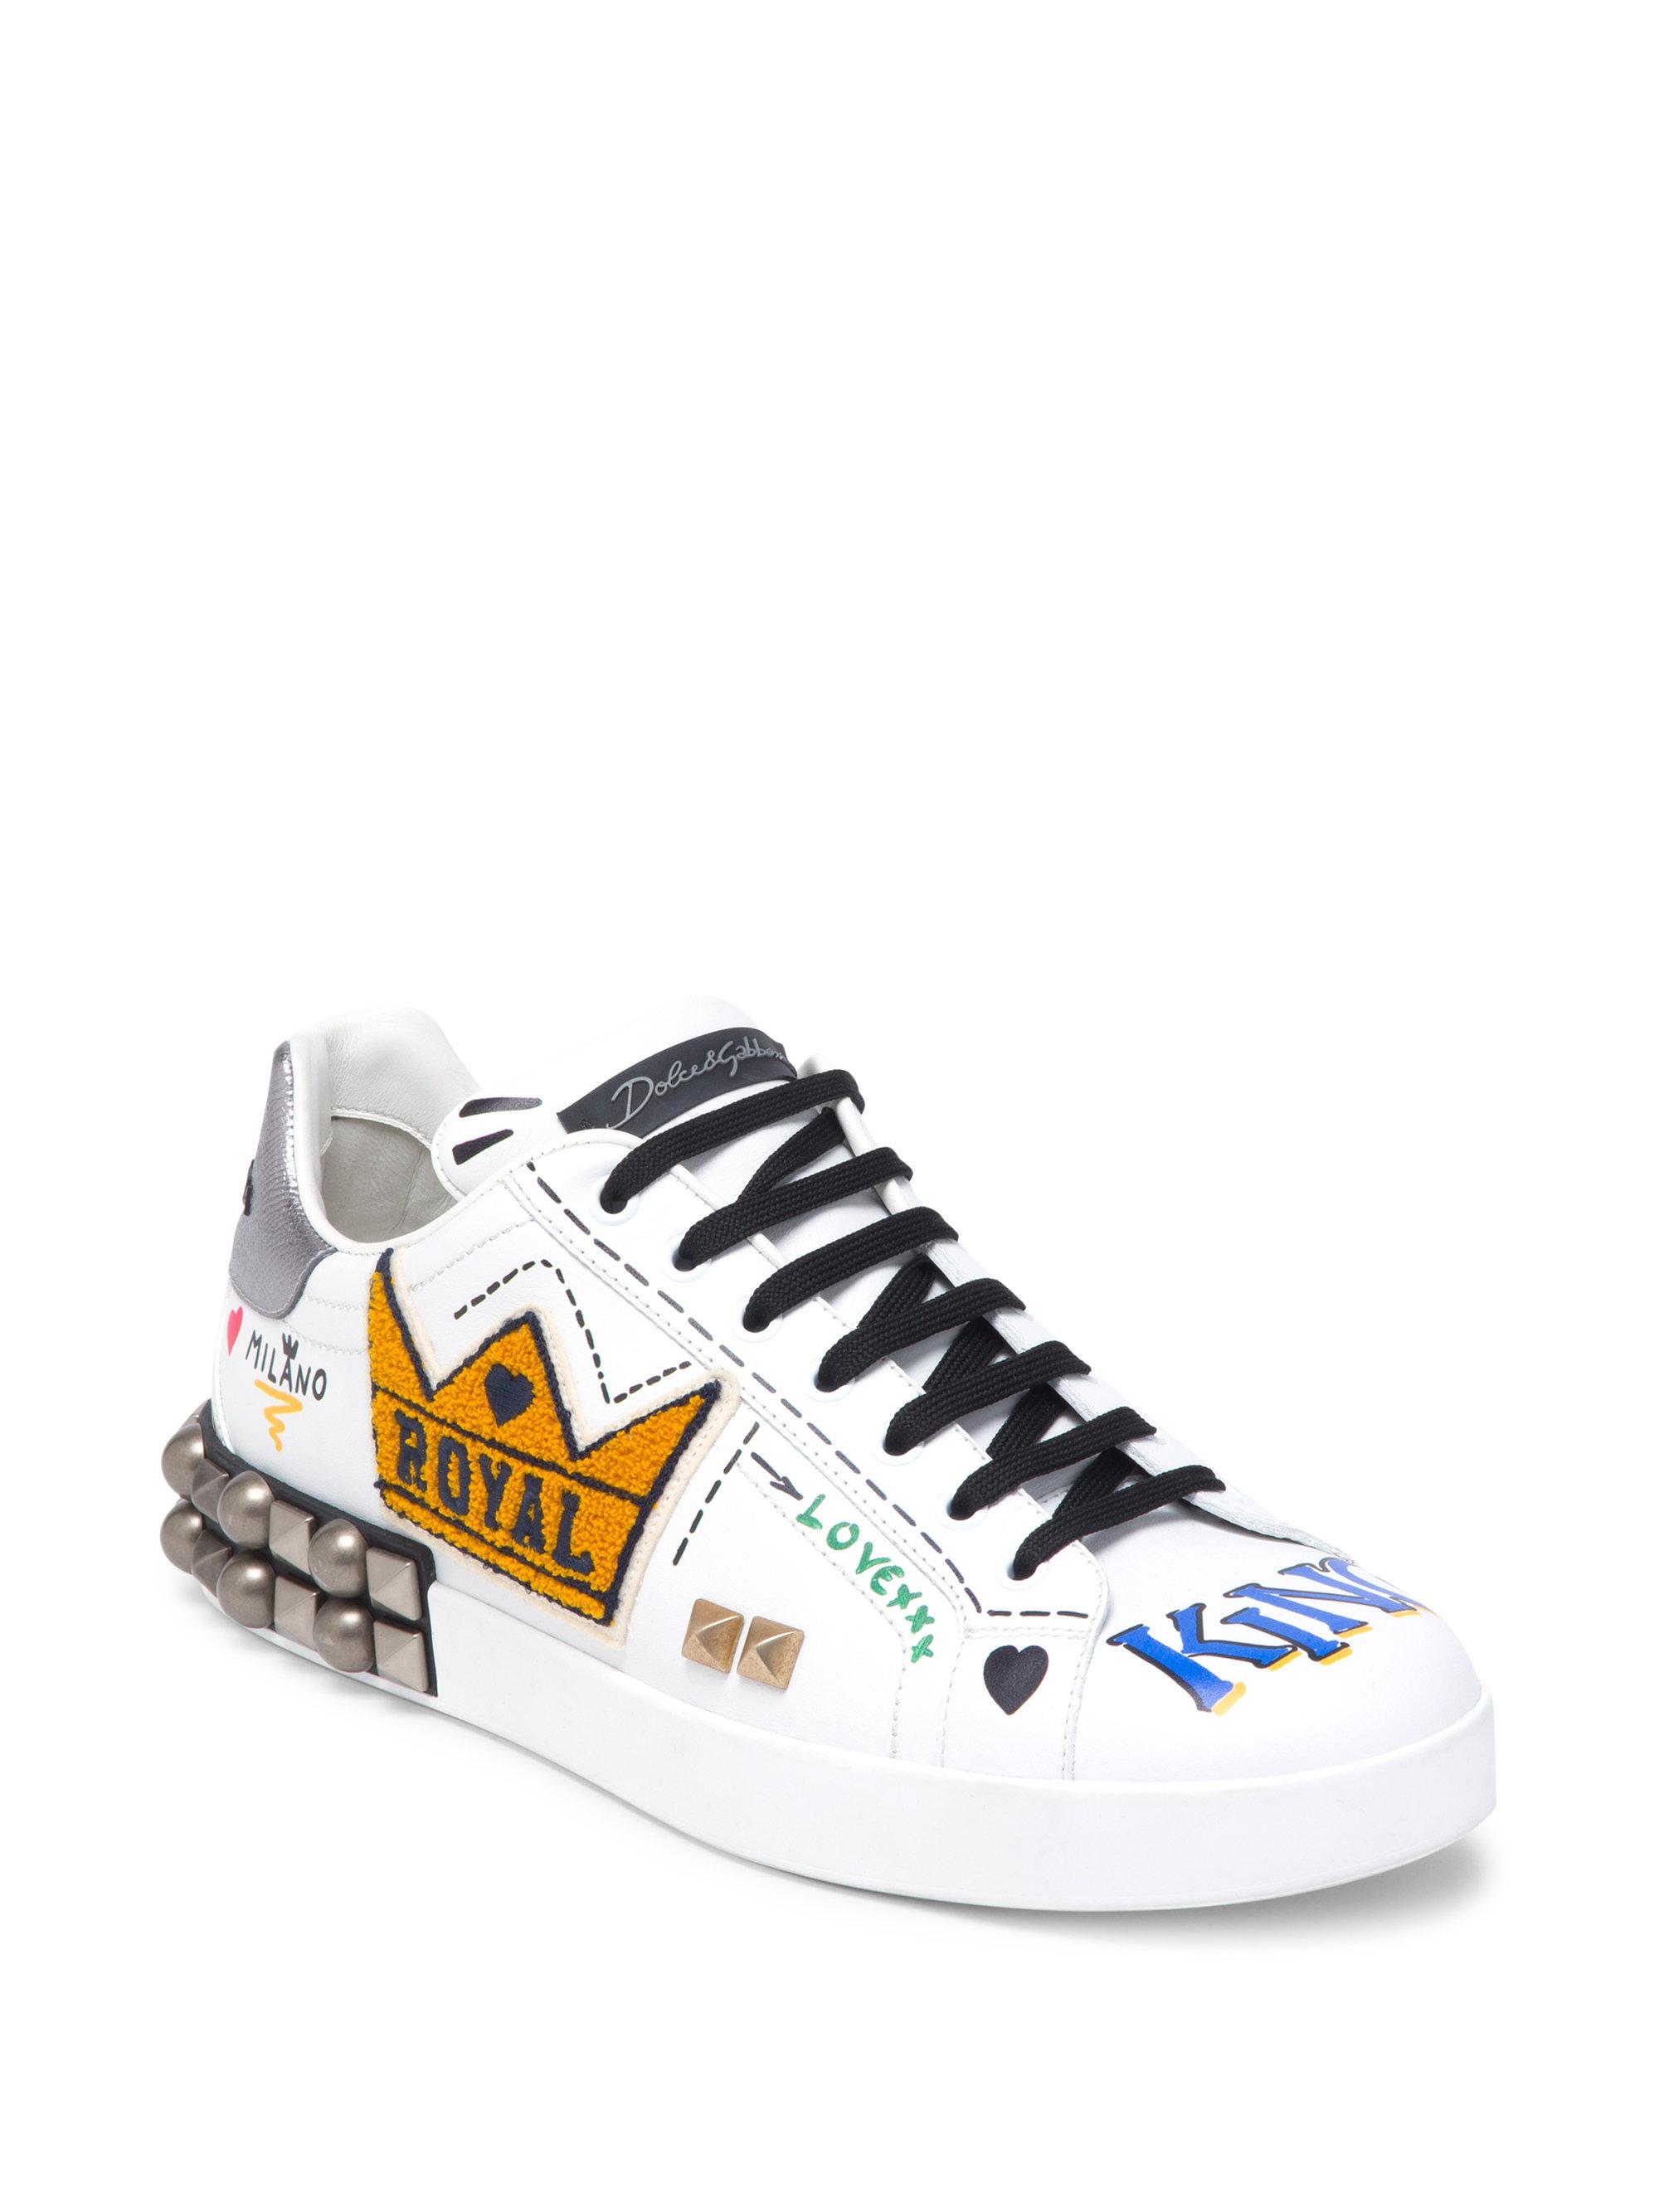 dolce gabbana patch sneakers